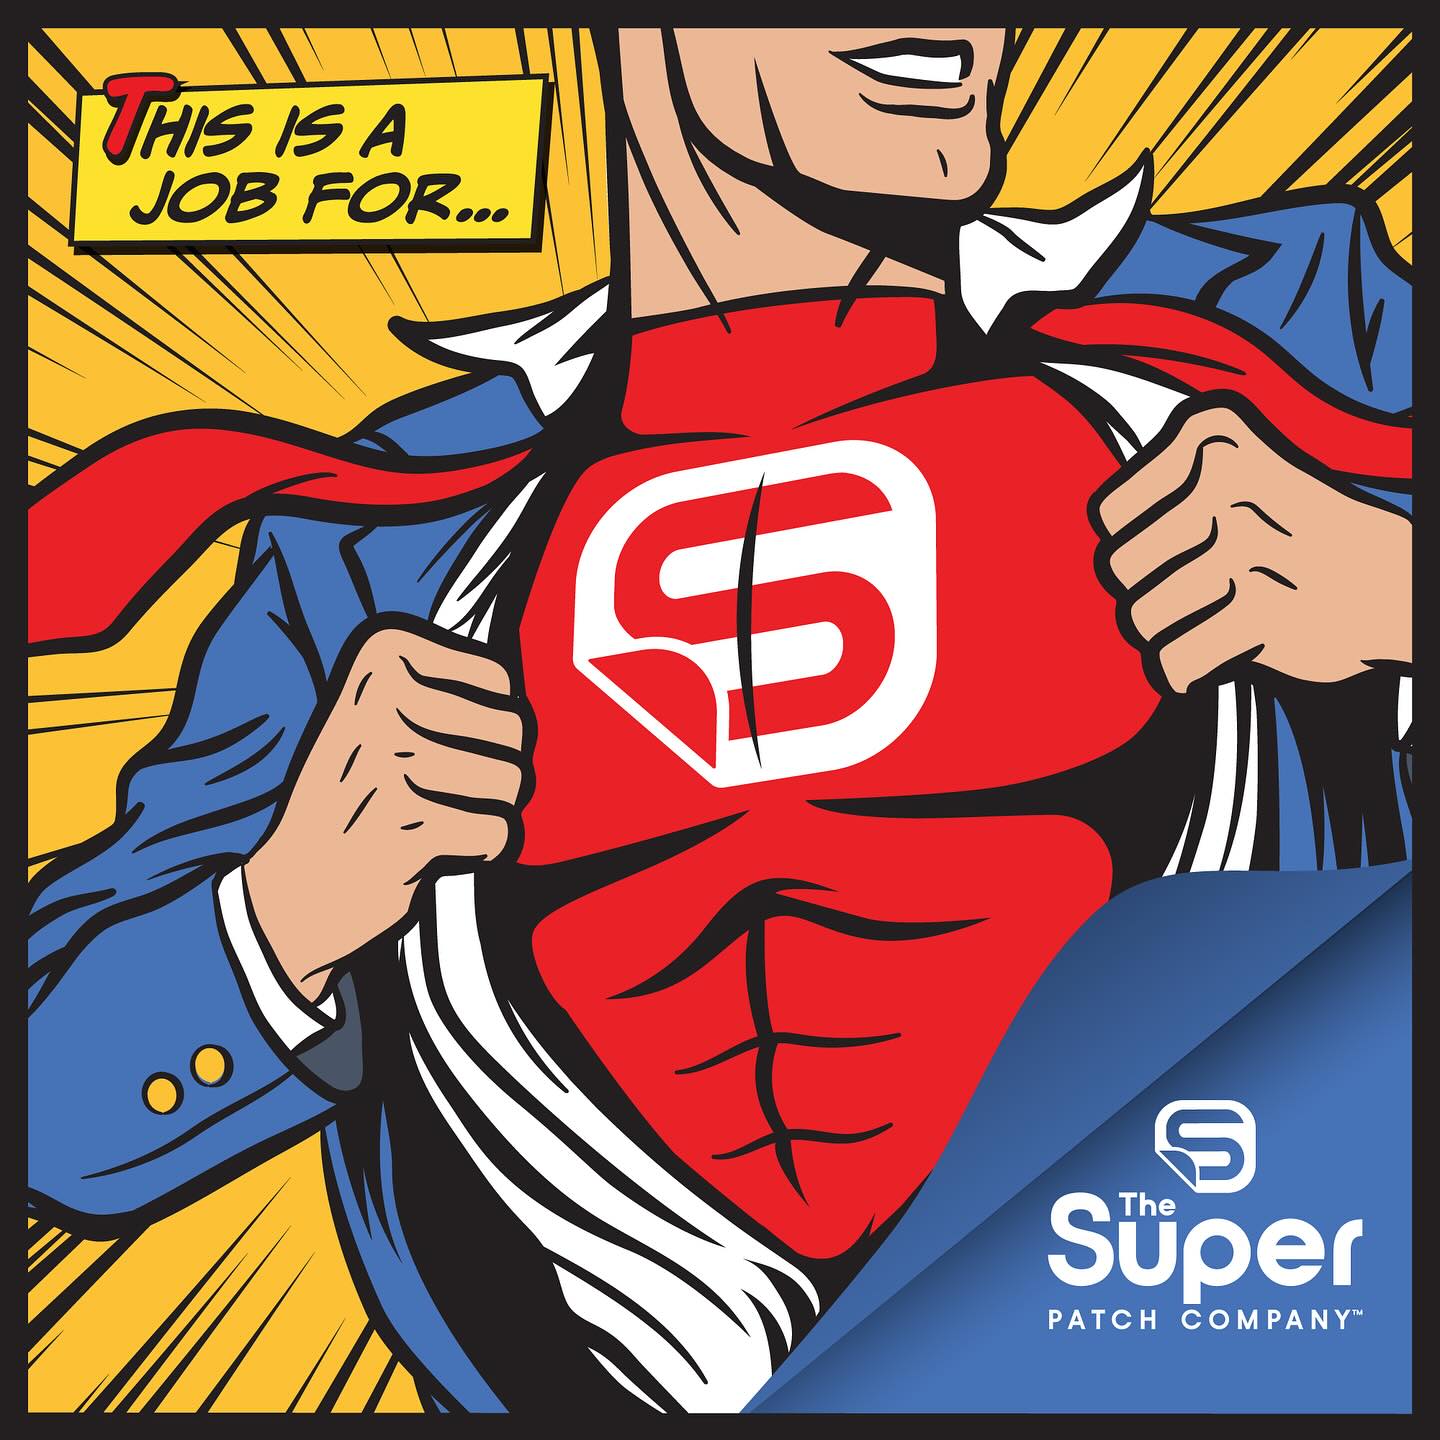 The Super Patch International Business Opportunity